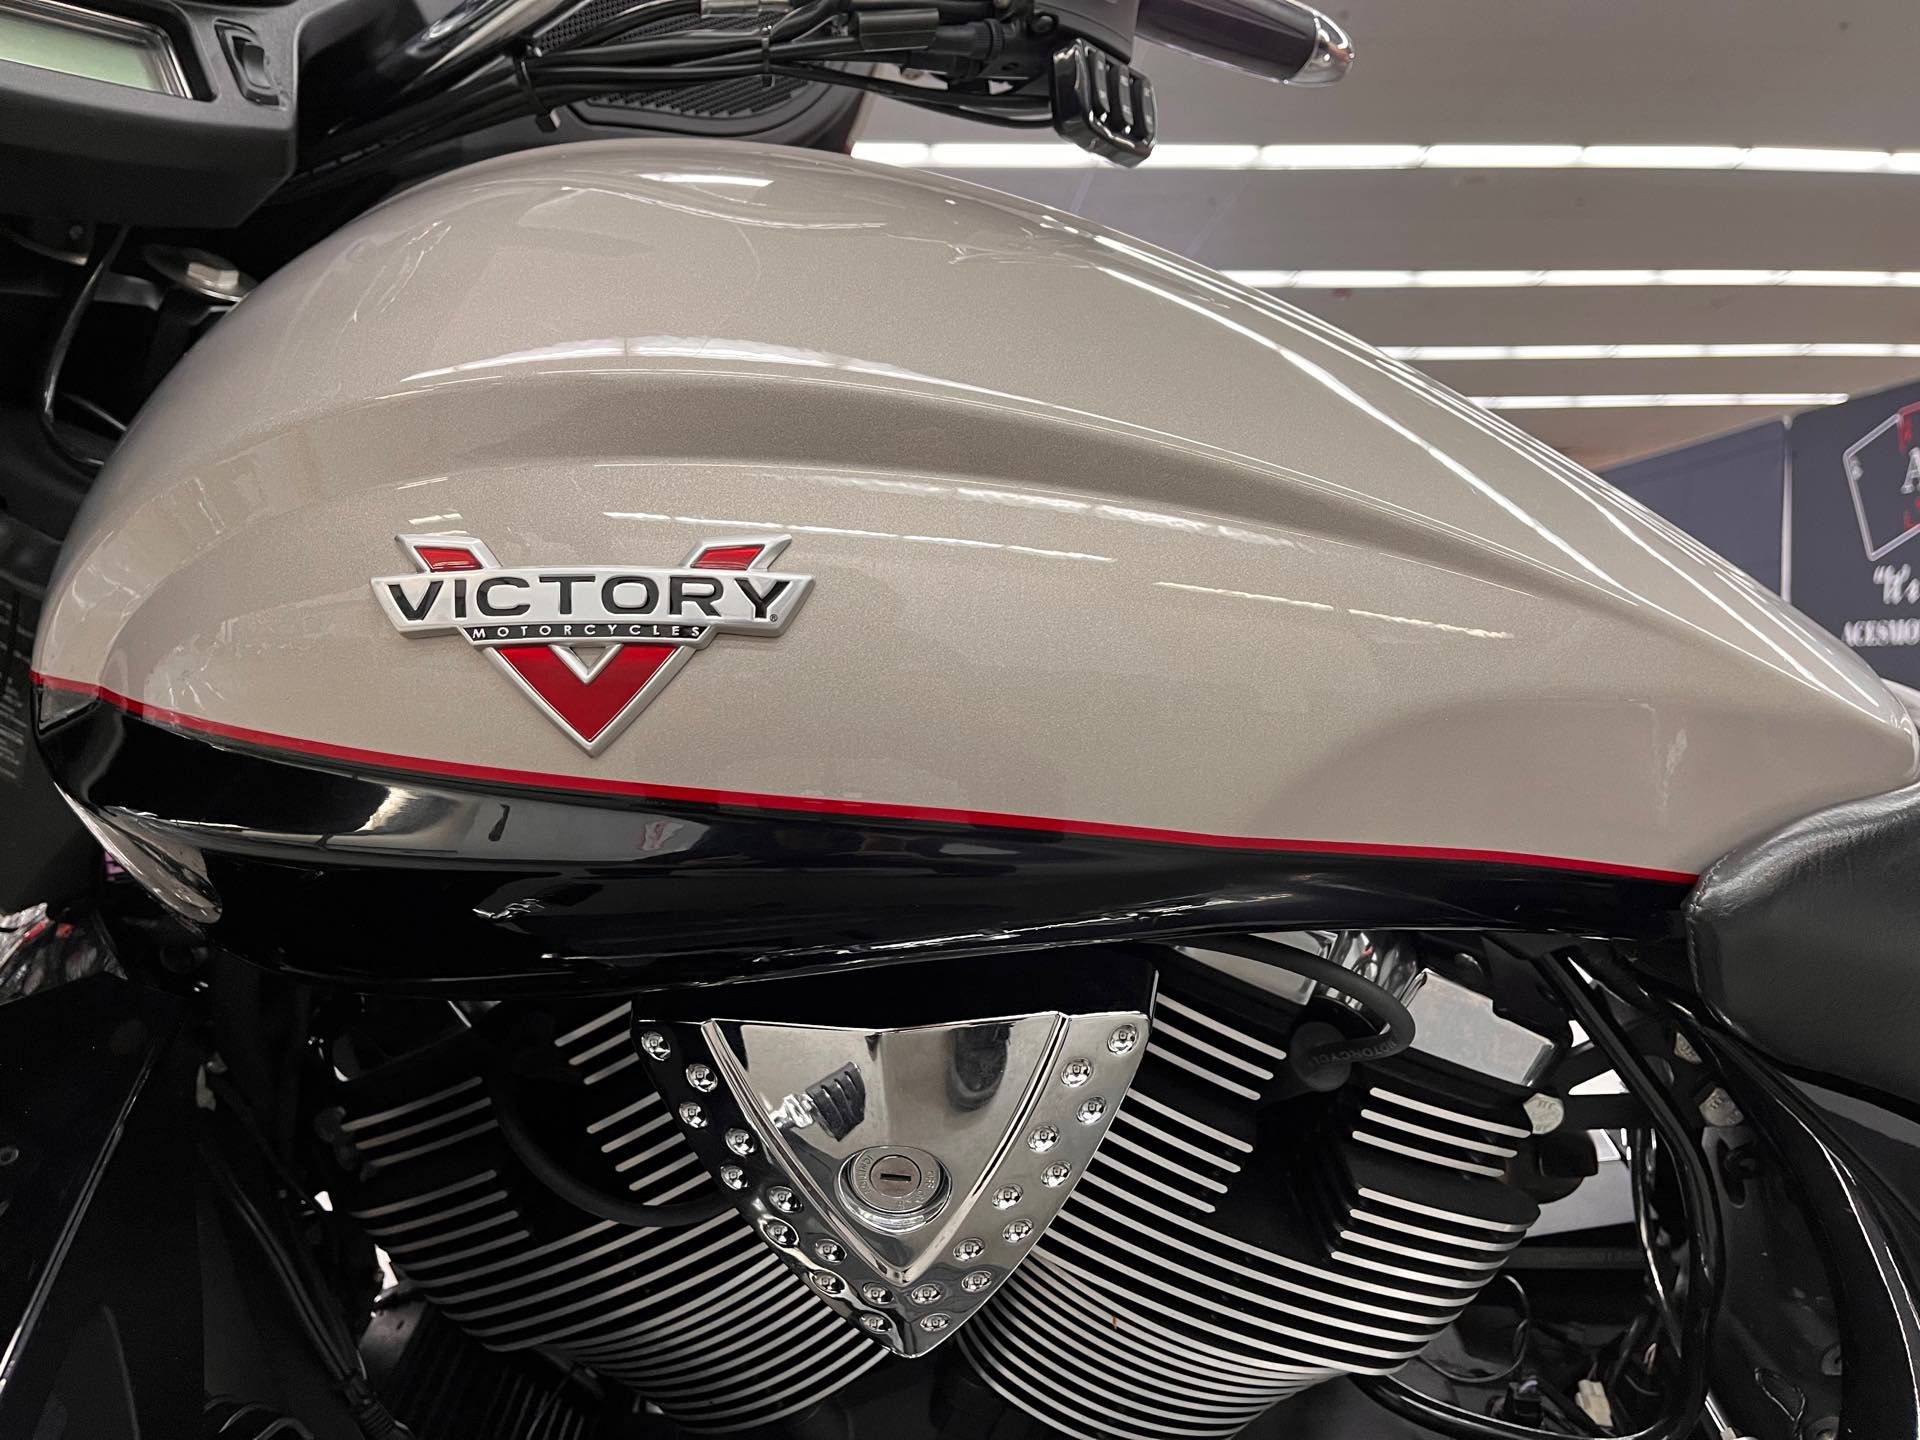 2014 VICTORY Cross Country at Aces Motorcycles - Denver